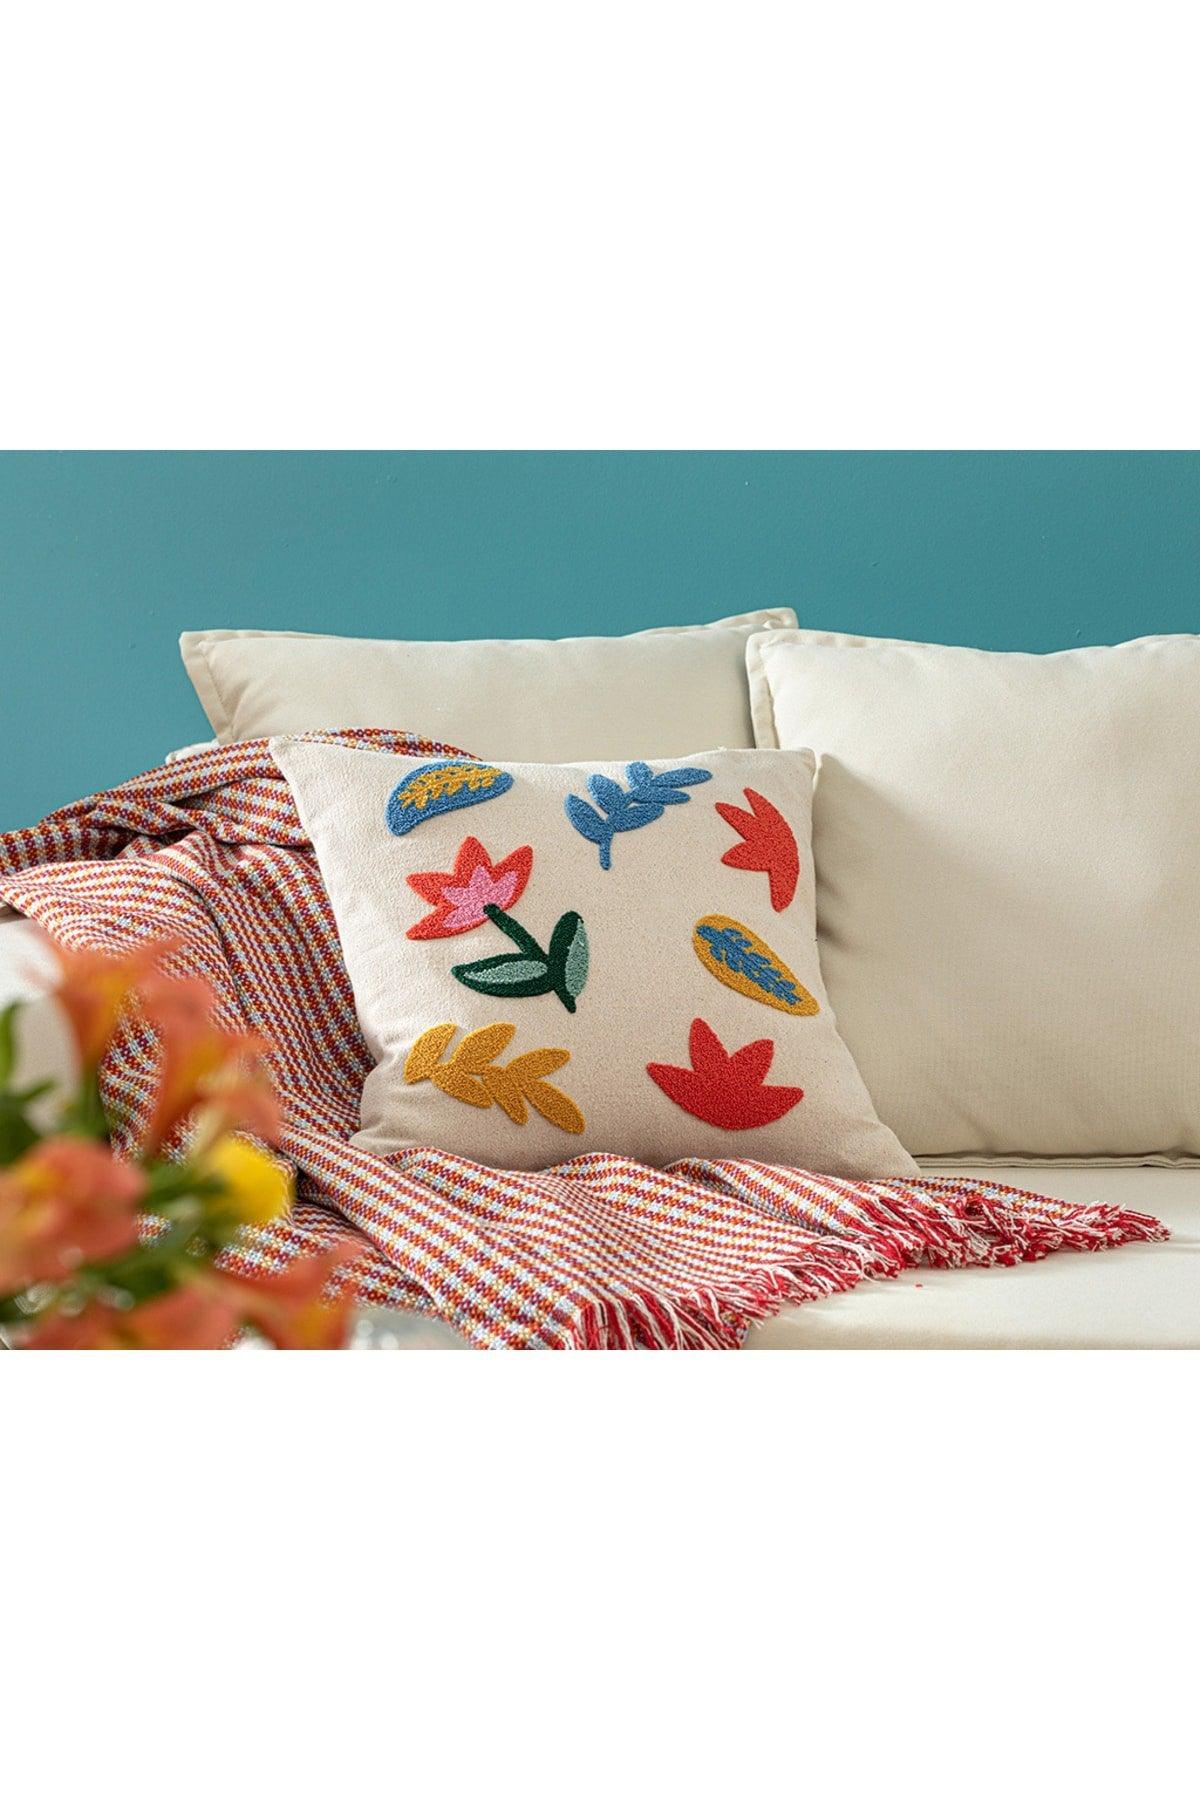 Tulipe Punch Embroidered Cushion Cover 45x45 Cm Natural - Swordslife